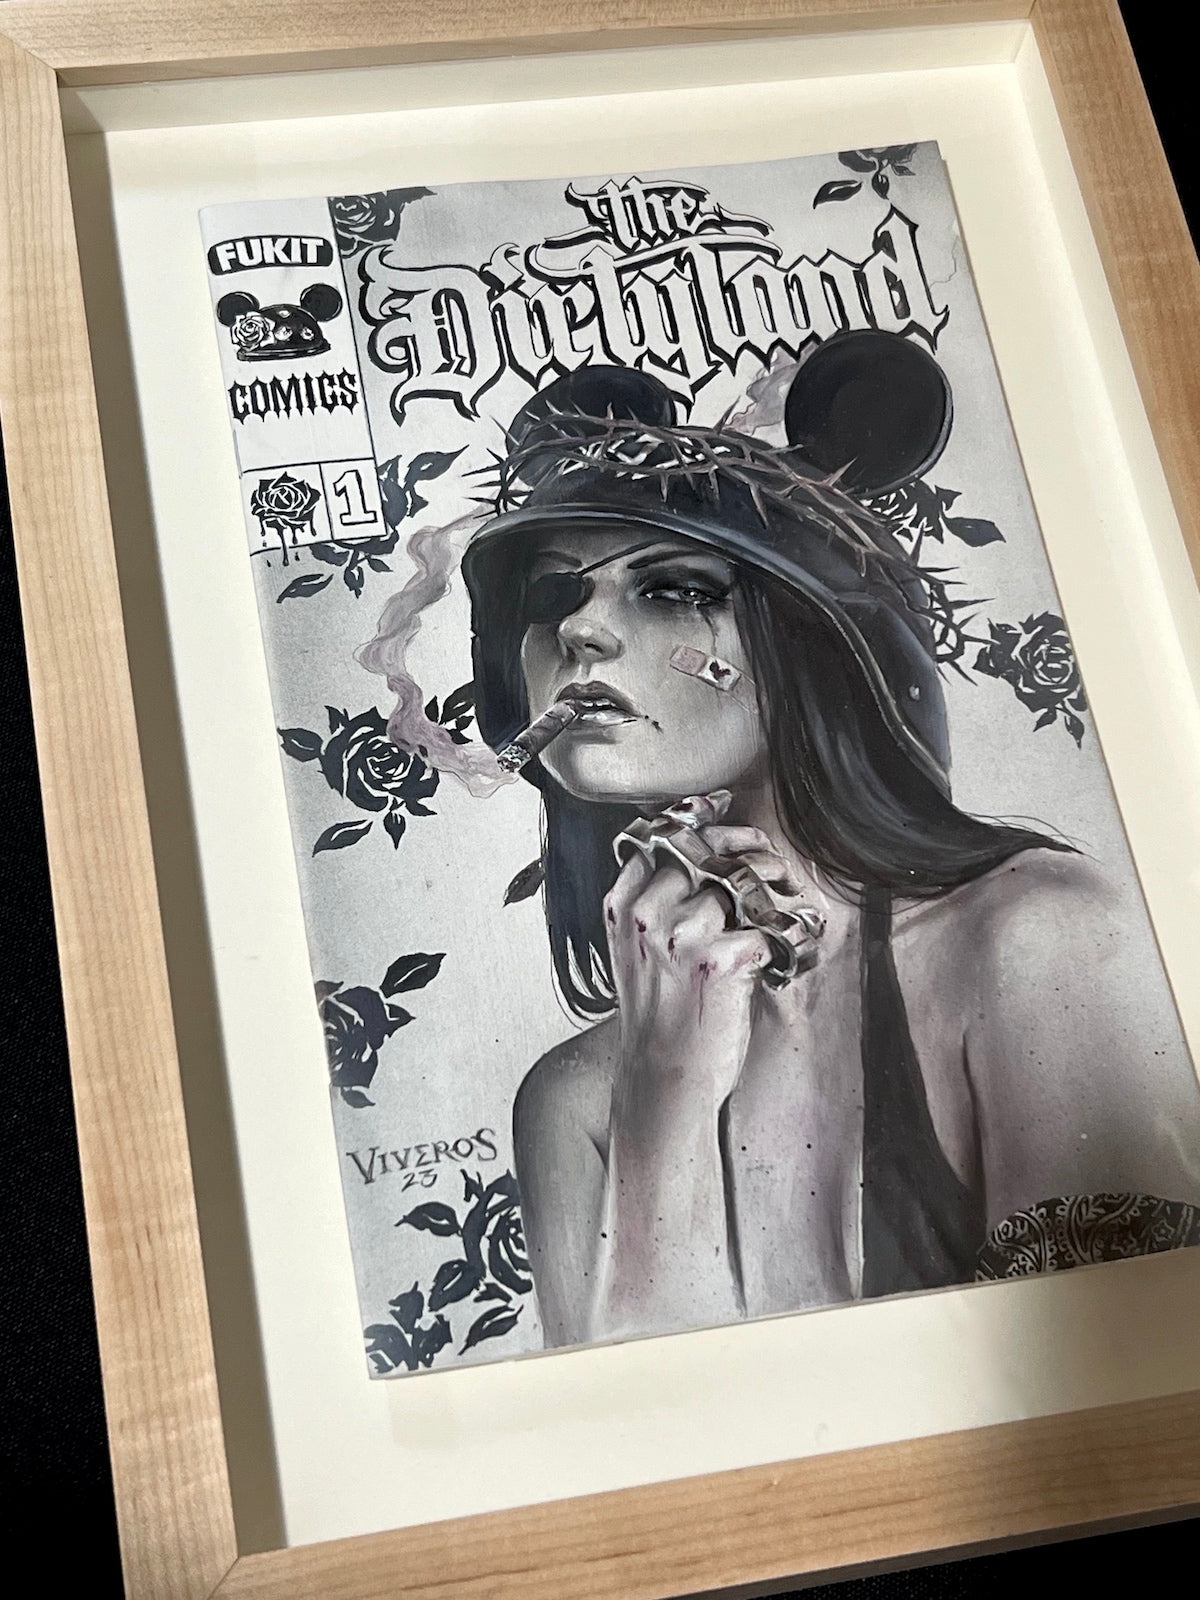 THE DIRTYLAND #1 (original painted comic cover)